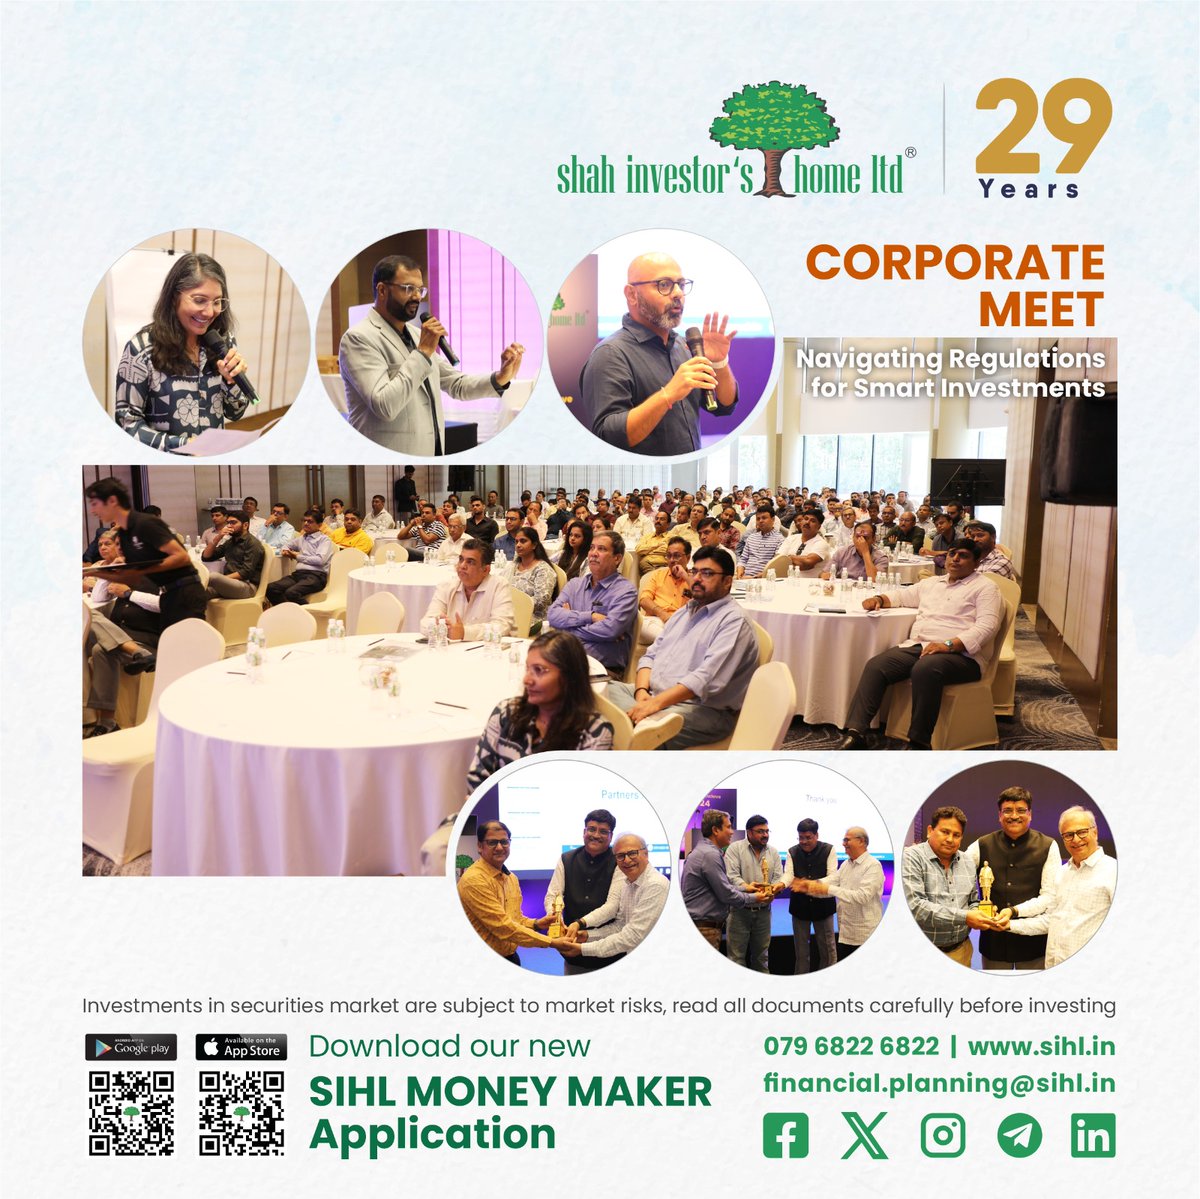 CORPORATE MEET :Time to shift focus for Client wealth creation and value added services...

Download the app from #googleplaystore or #iphoneappstore for more updates or You can also scan the #QRCode given in the image...

#investmentstrategy  #financialliteracy